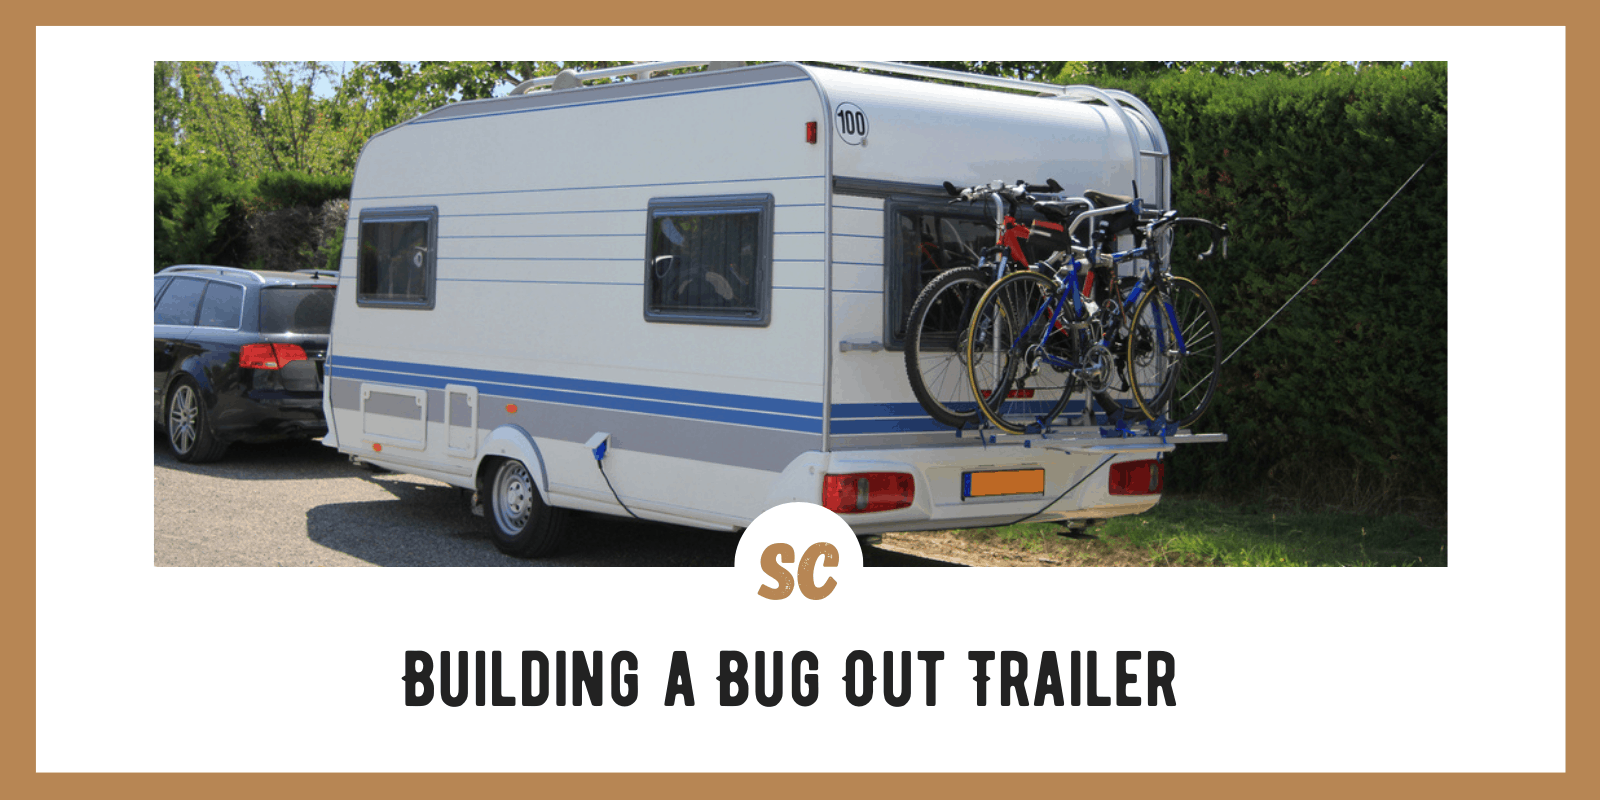 Building a Bug Out Trailer: 5 Tips, Pros, Cons